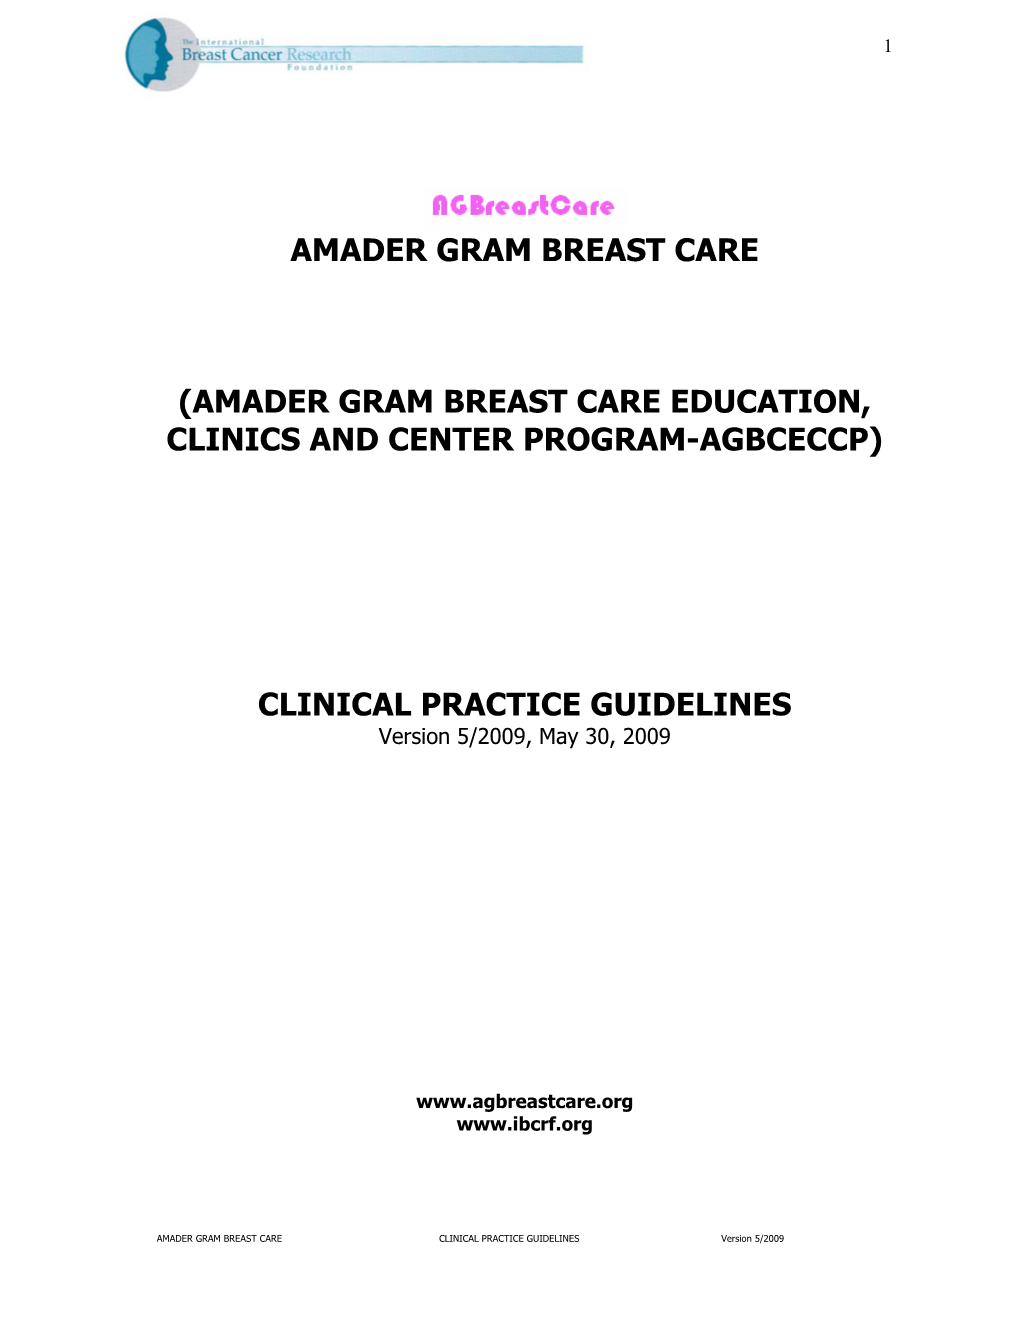 Amader Gram Breast Care Education, Clinics and Center Program-Agbceccp